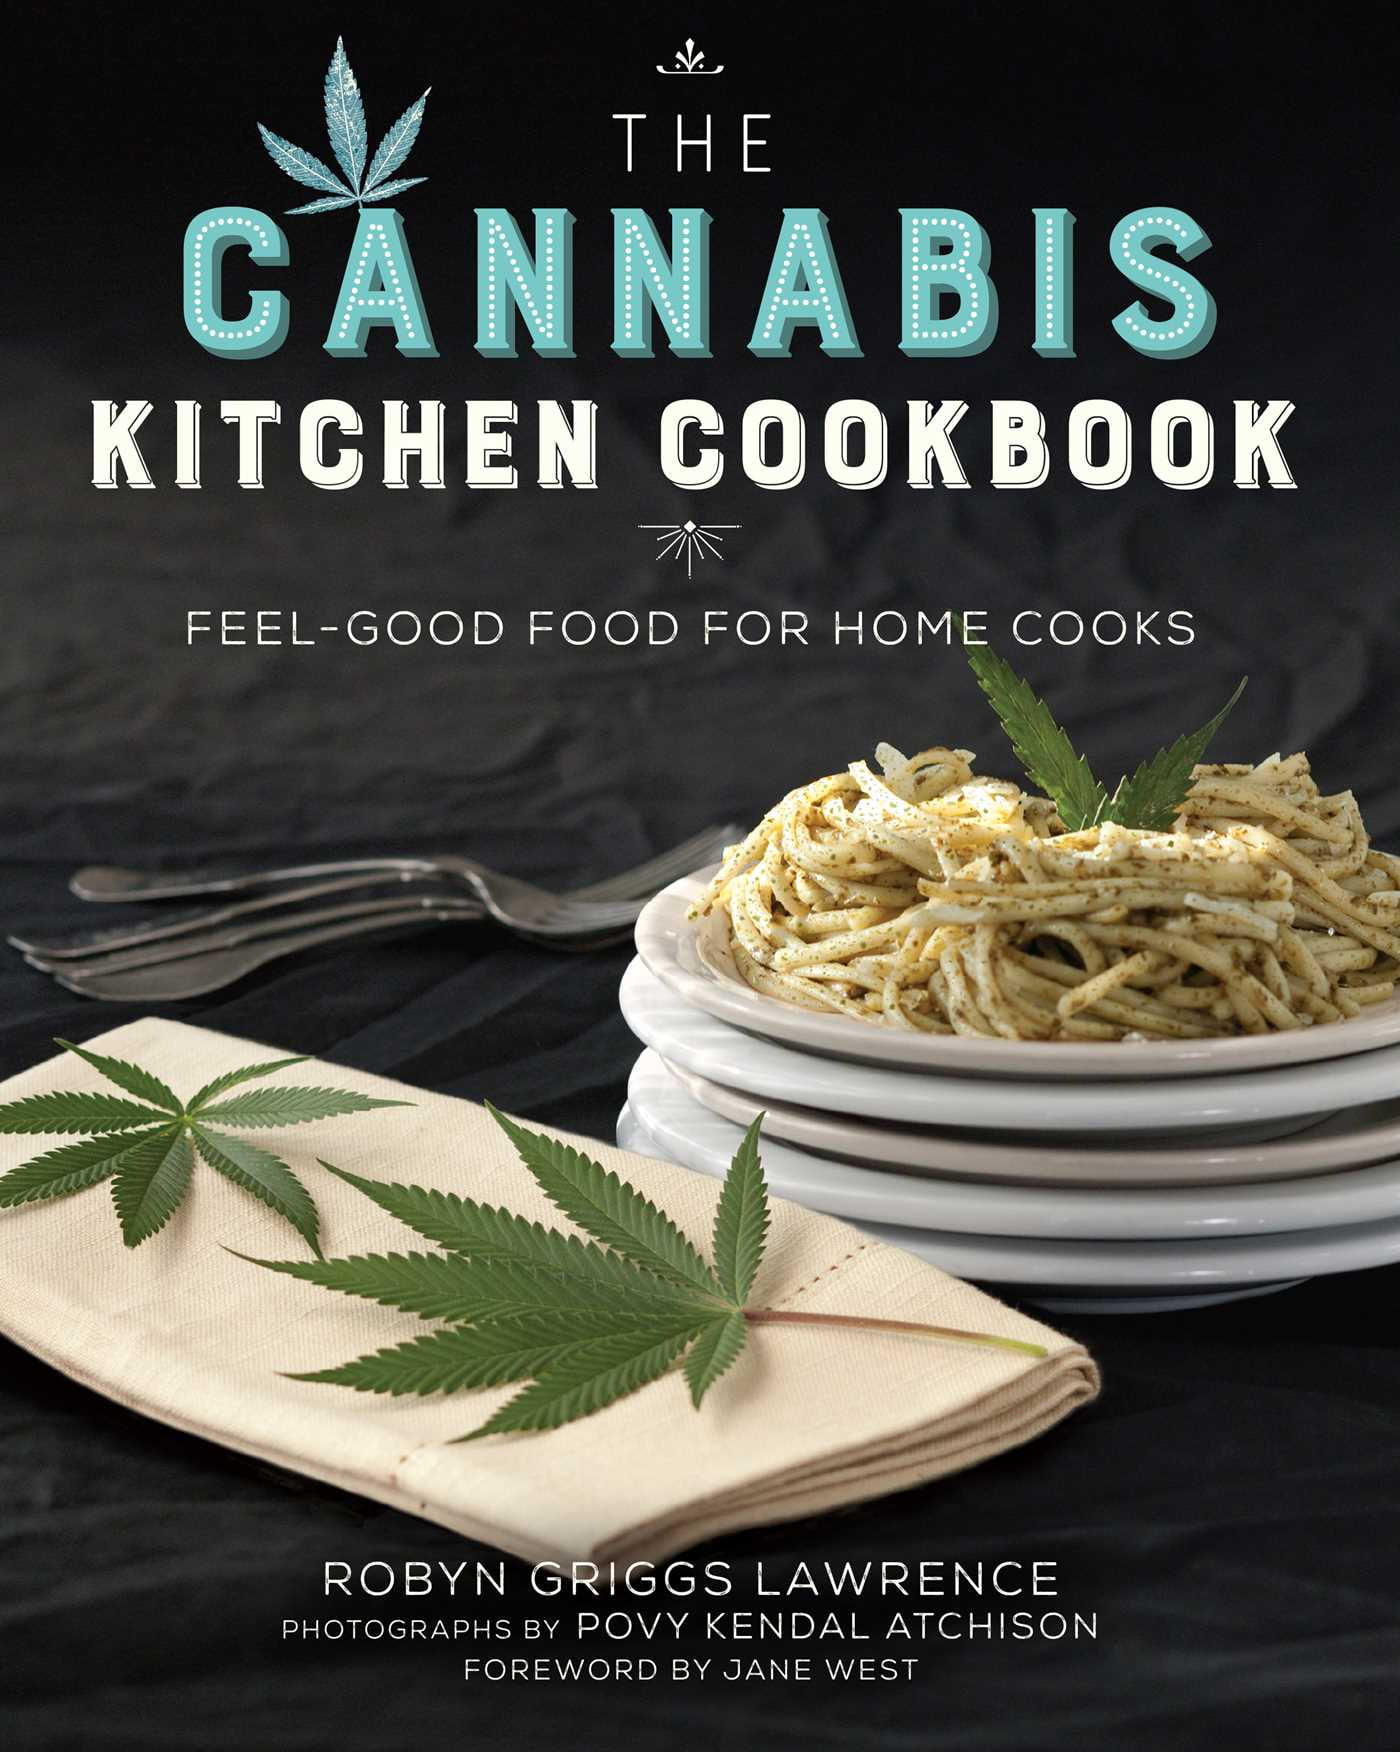 The　Cannabis　Cooks　for　Kitchen　Cookbook　Home　Feel-Good　Food　(Hardcover)